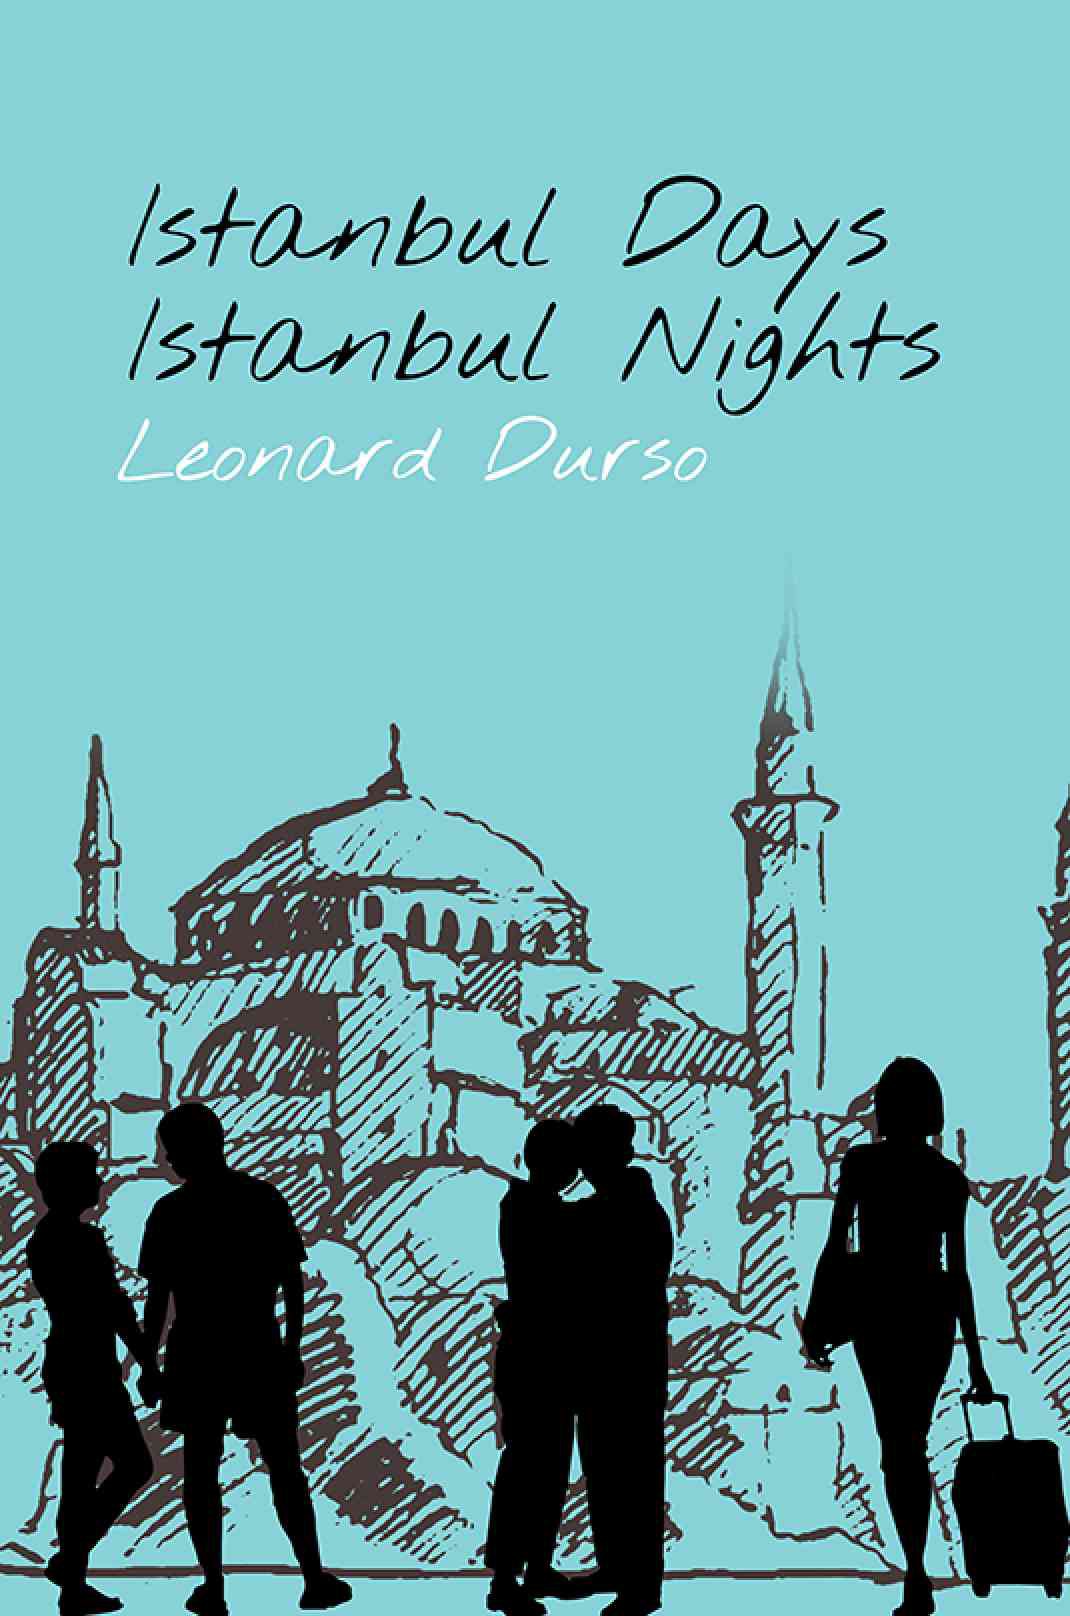 ARC review on ‘Books for Thought’- Istanbul Days, Istanbul Nights by Leonard Durso